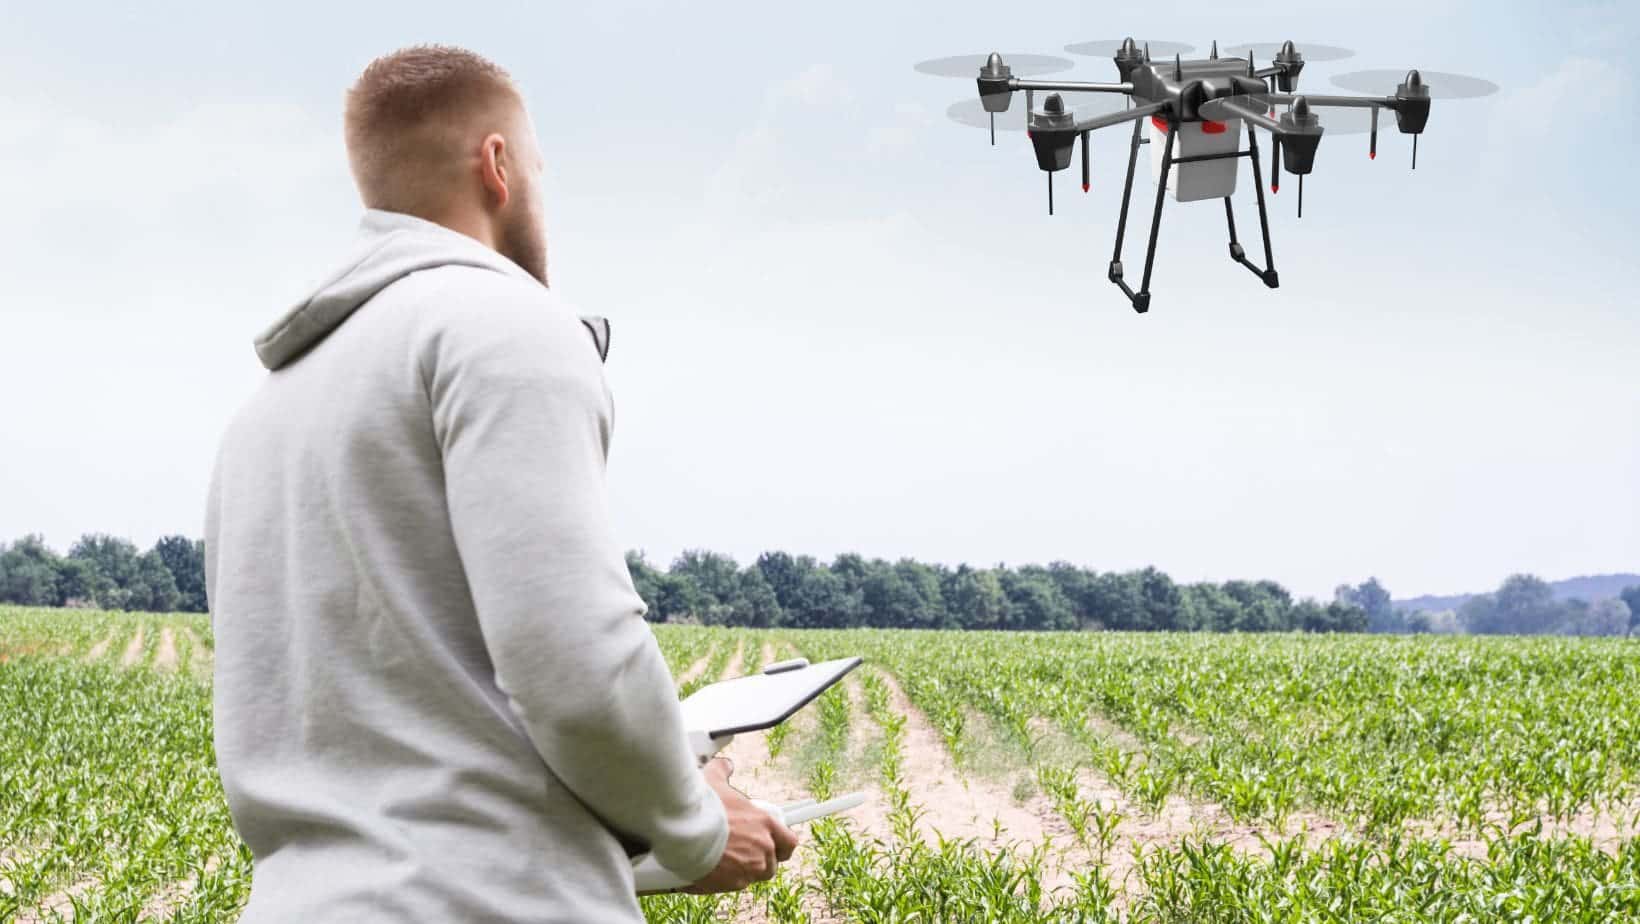 image of a drone being used in a crop field